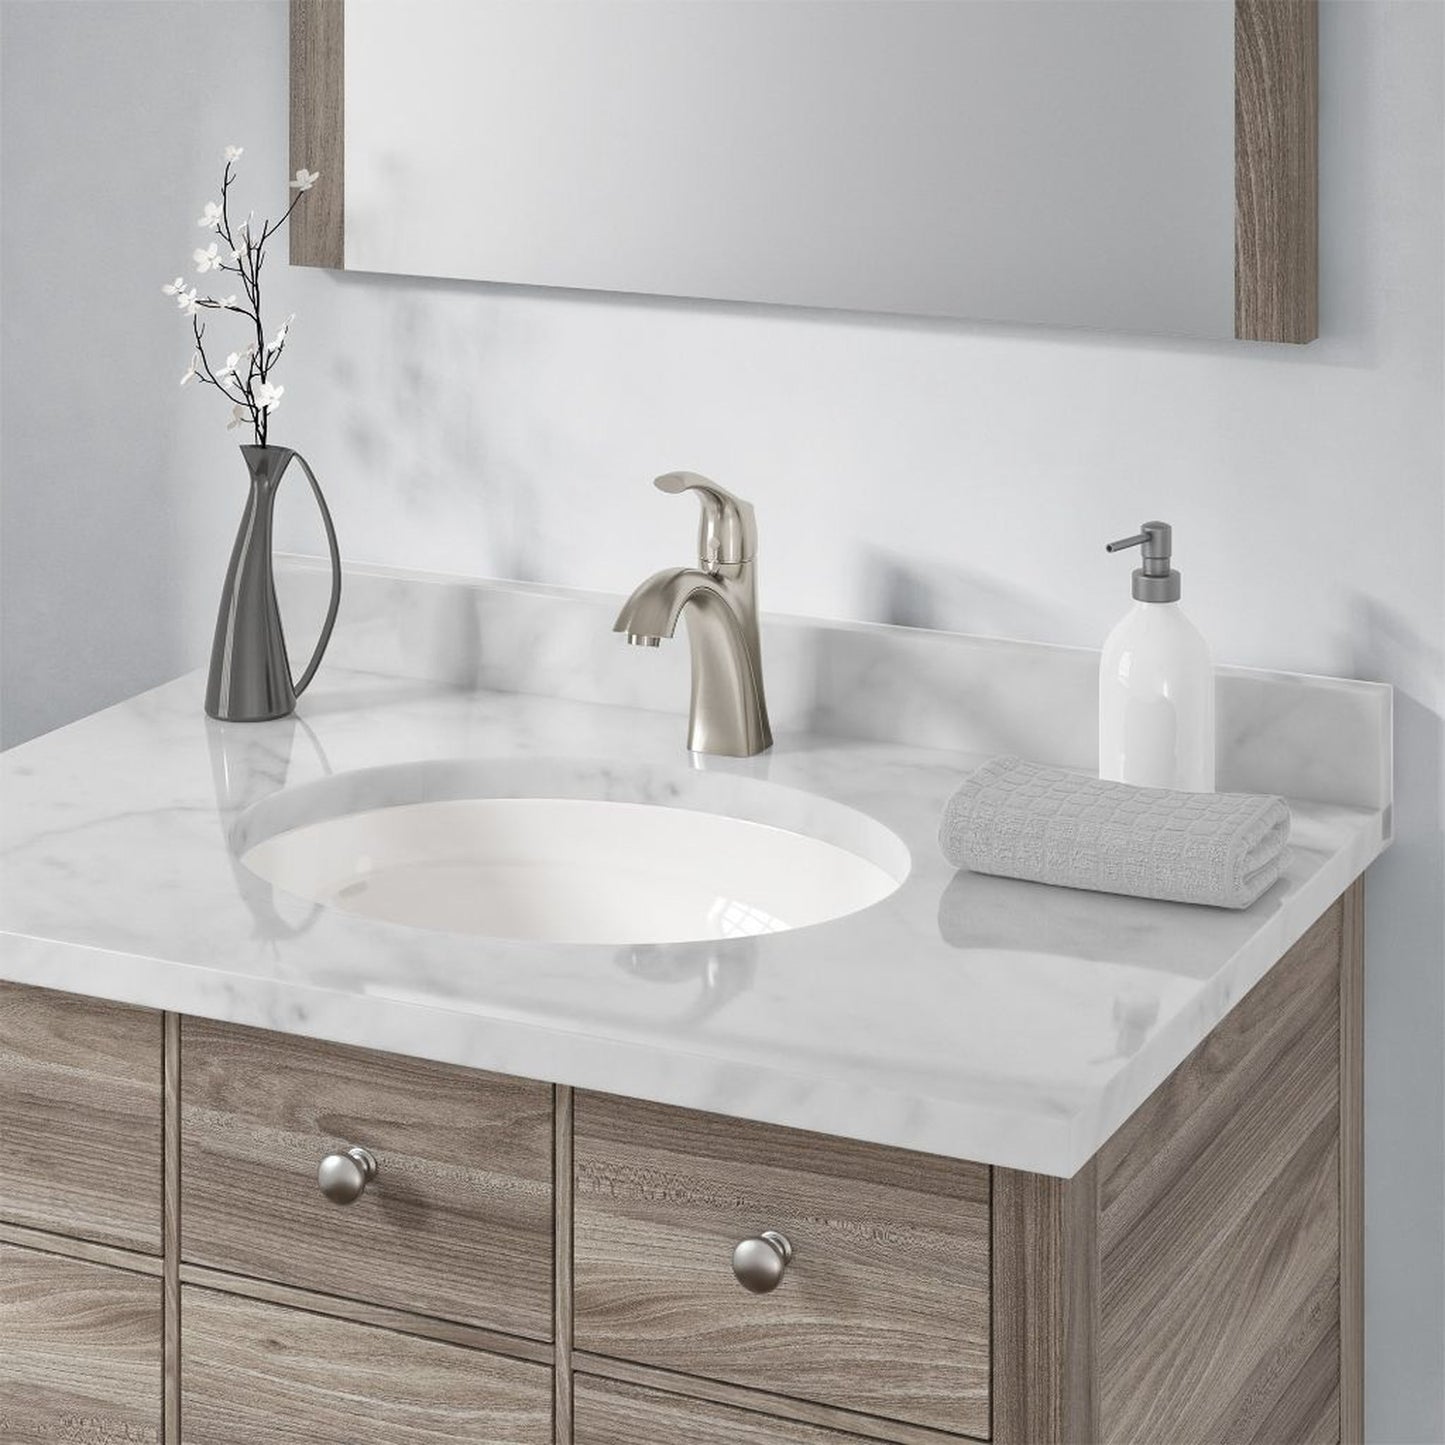 Allora USA 16" X 13.25" Vitreous China White Oval Porcelain Undermount Sink With Overflow